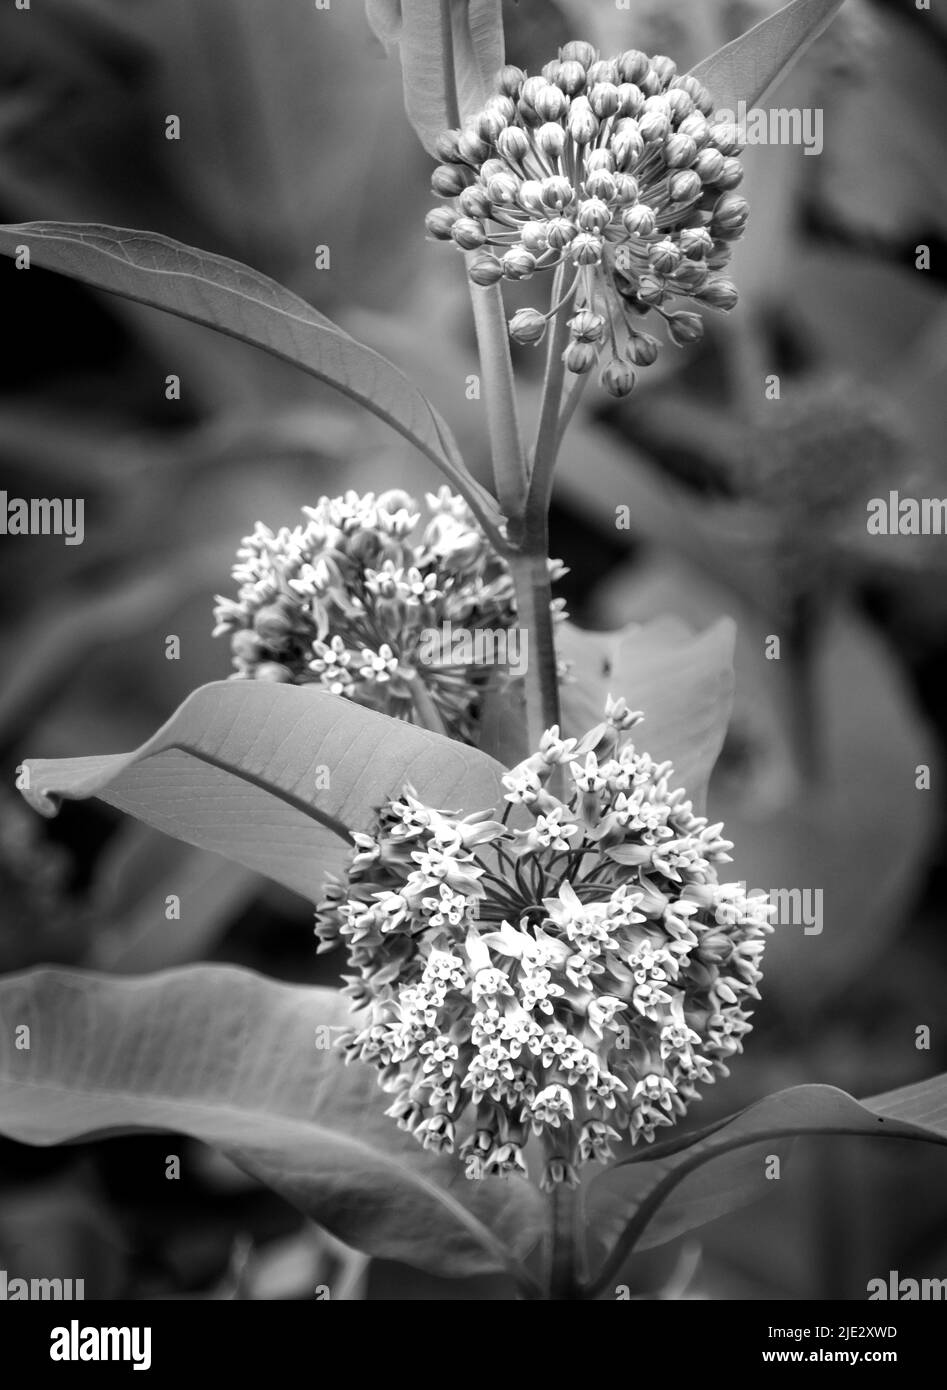 Black and white image of three bunches of Milkweed flowers, Asclepias, with leaves, spring or summer, Lancaster County, Pennsylvania Stock Photo